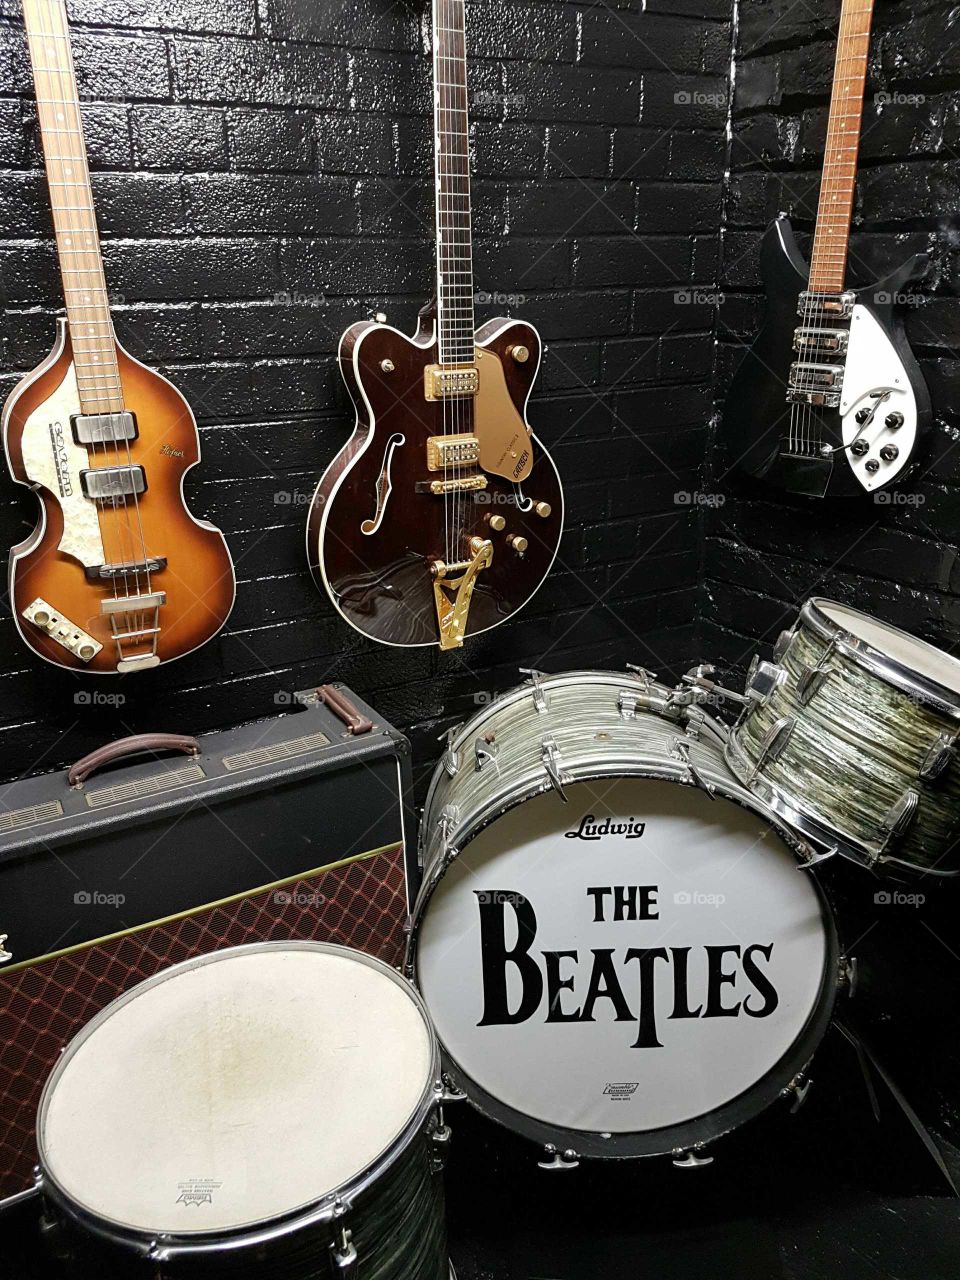 The Beatles Guitar and Drums Cavern Club England